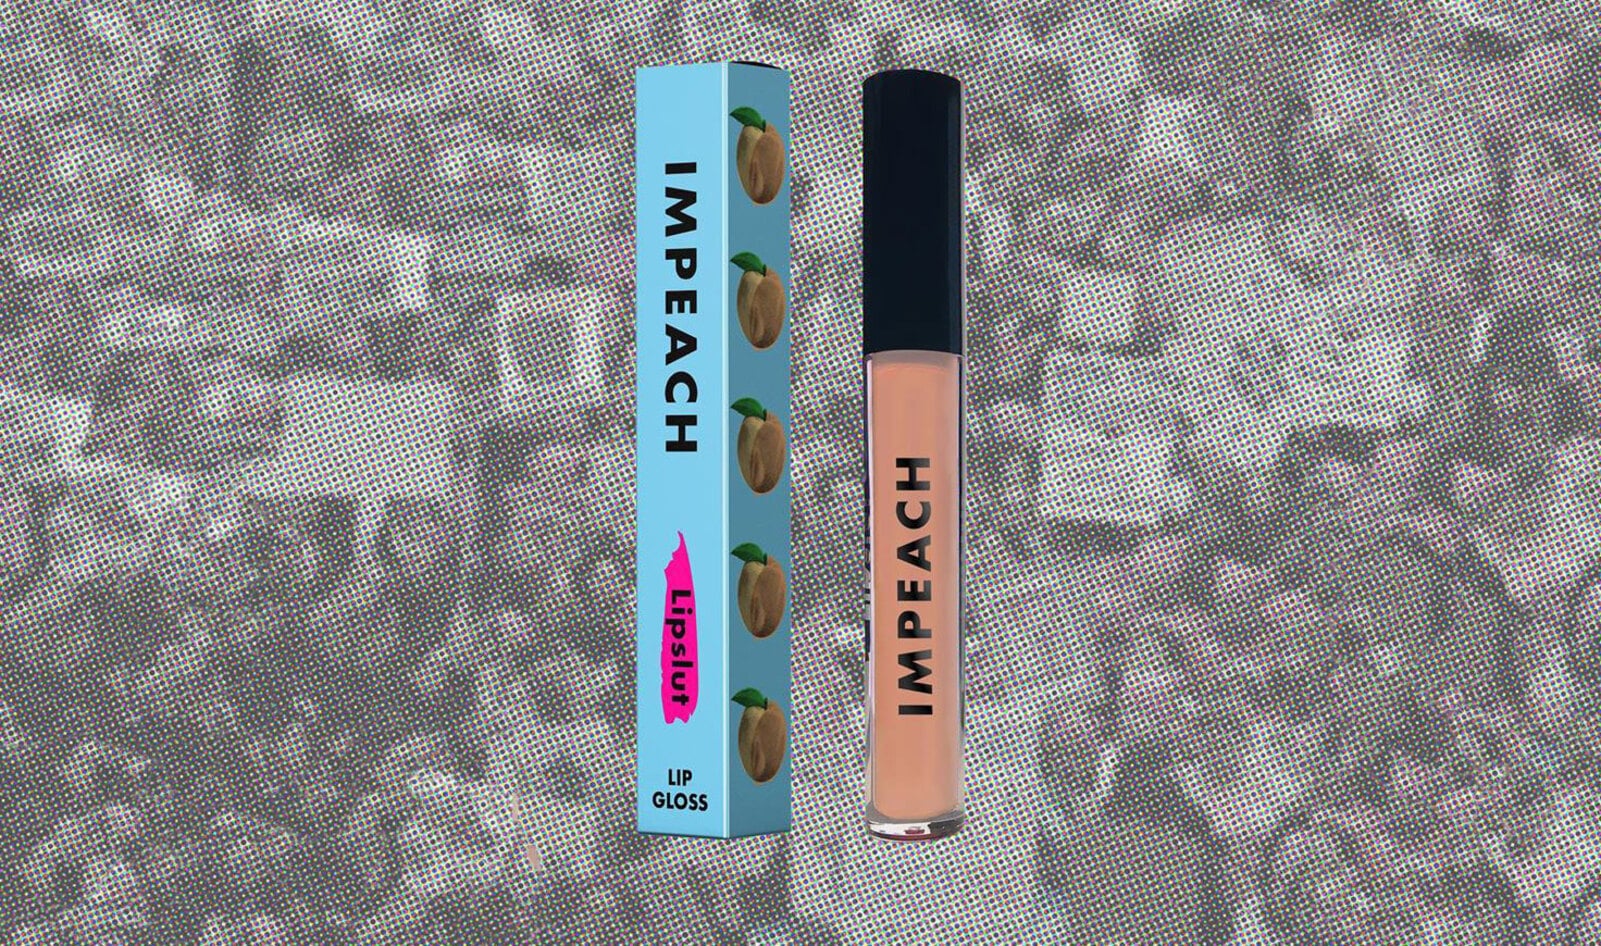 Beauty Brand Launches Vegan Impeach Lipgloss to Benefit Human-Rights Organizations